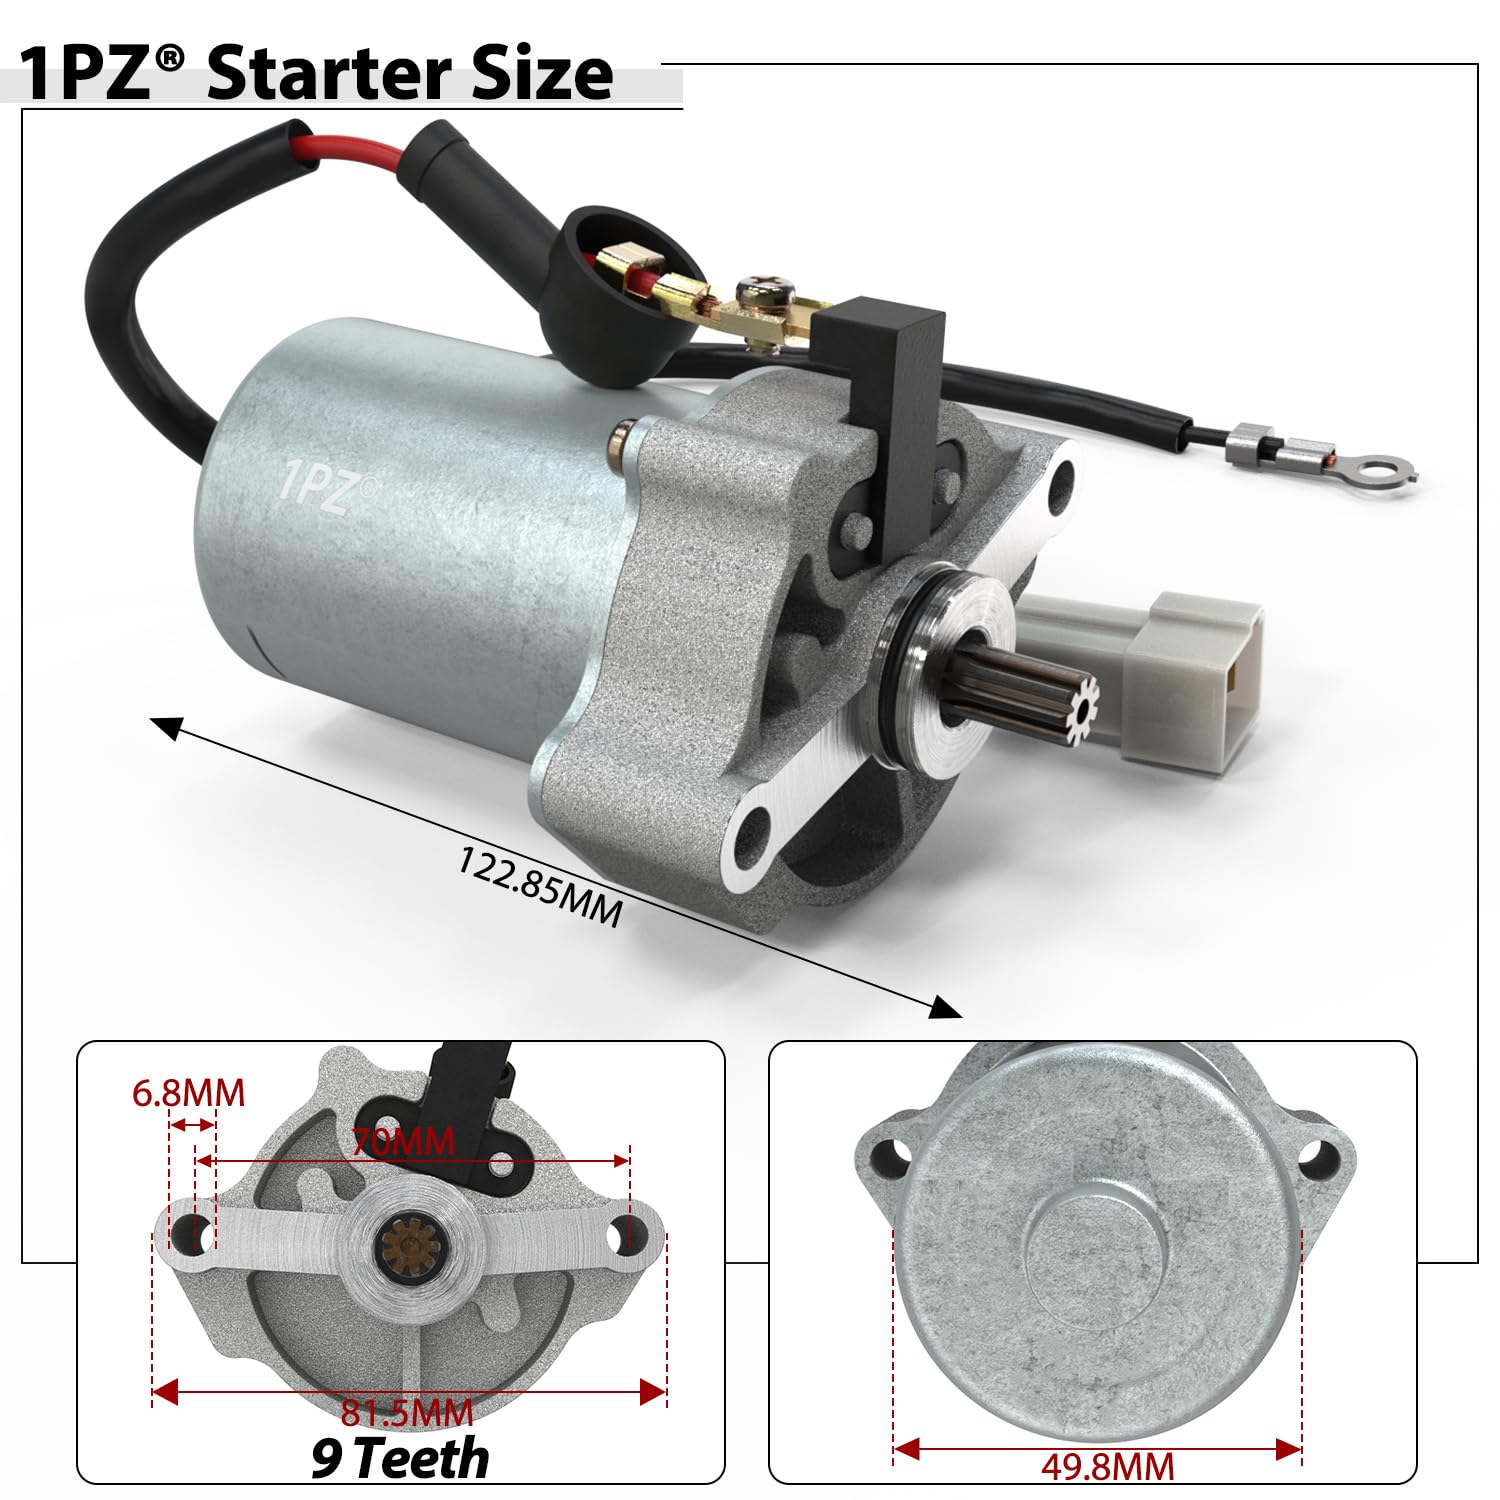 1PZ Starter Motor Replacement for Polaris Outlaw Sportsman 90 110 2007-2019 0453478 0454952